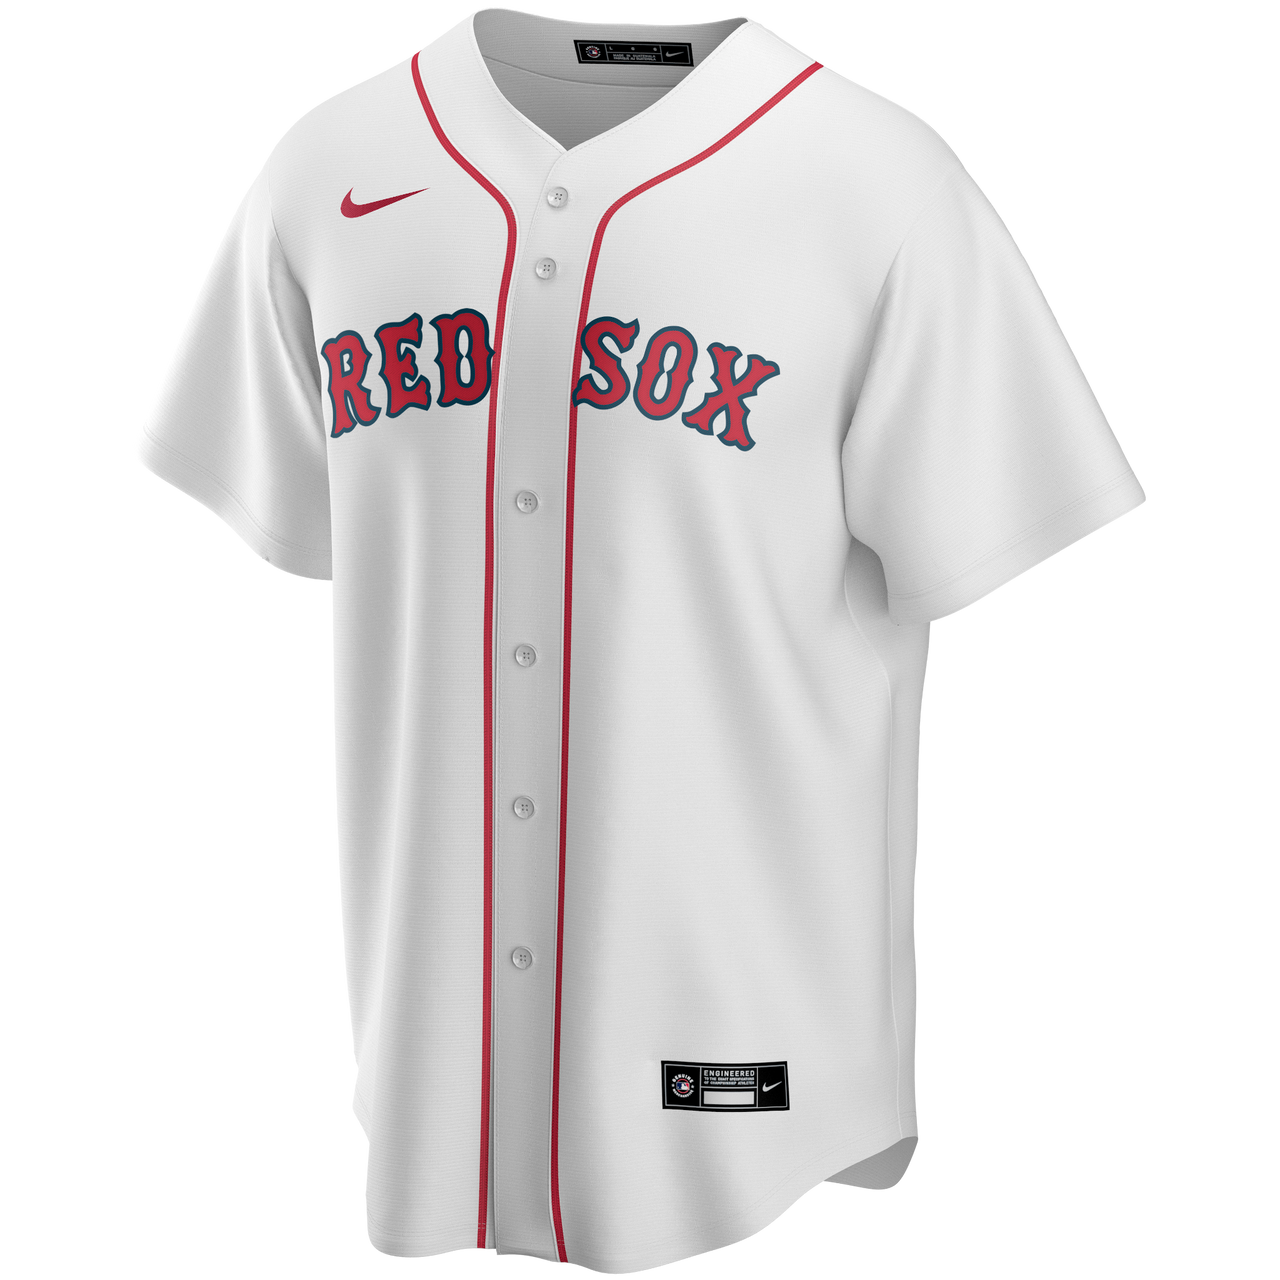 Dustin Pedroia Red Sox Men's Majestic Road Gray Flex Base Collection Player  Jersey